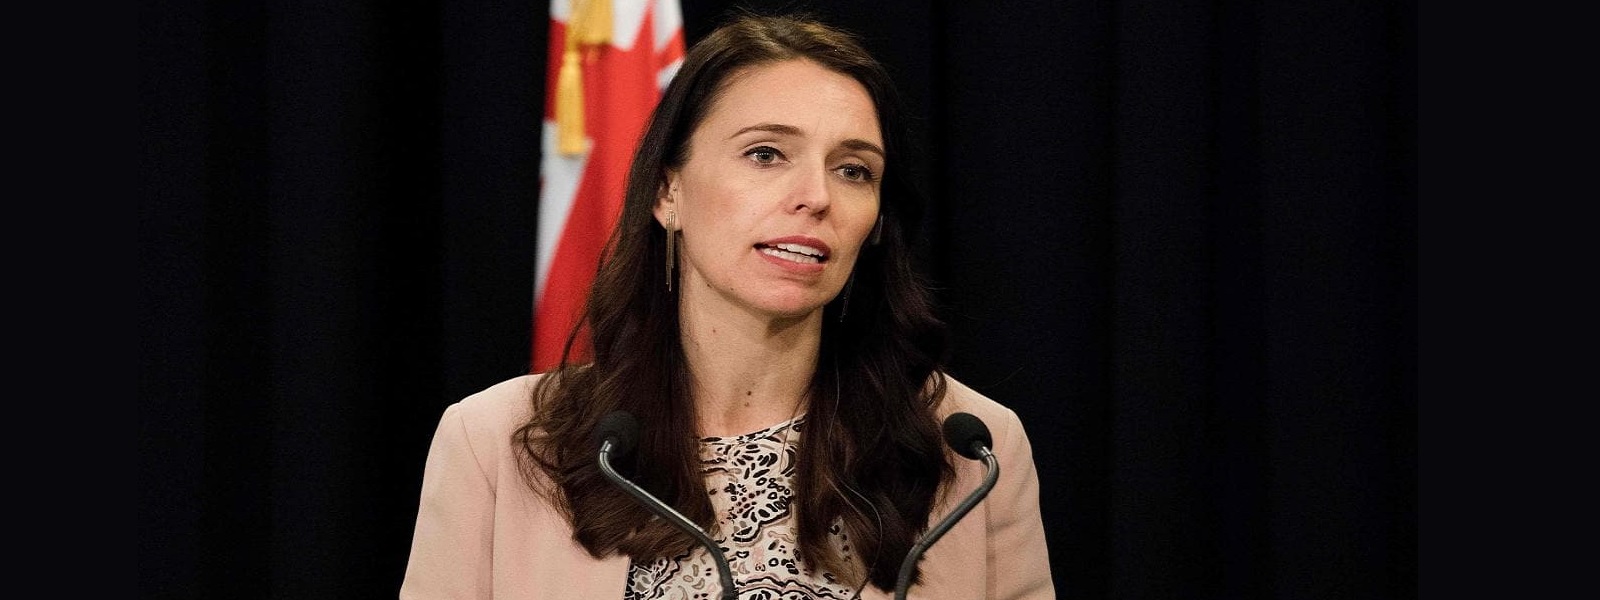 NZ PM takes office at the end of maternity leave